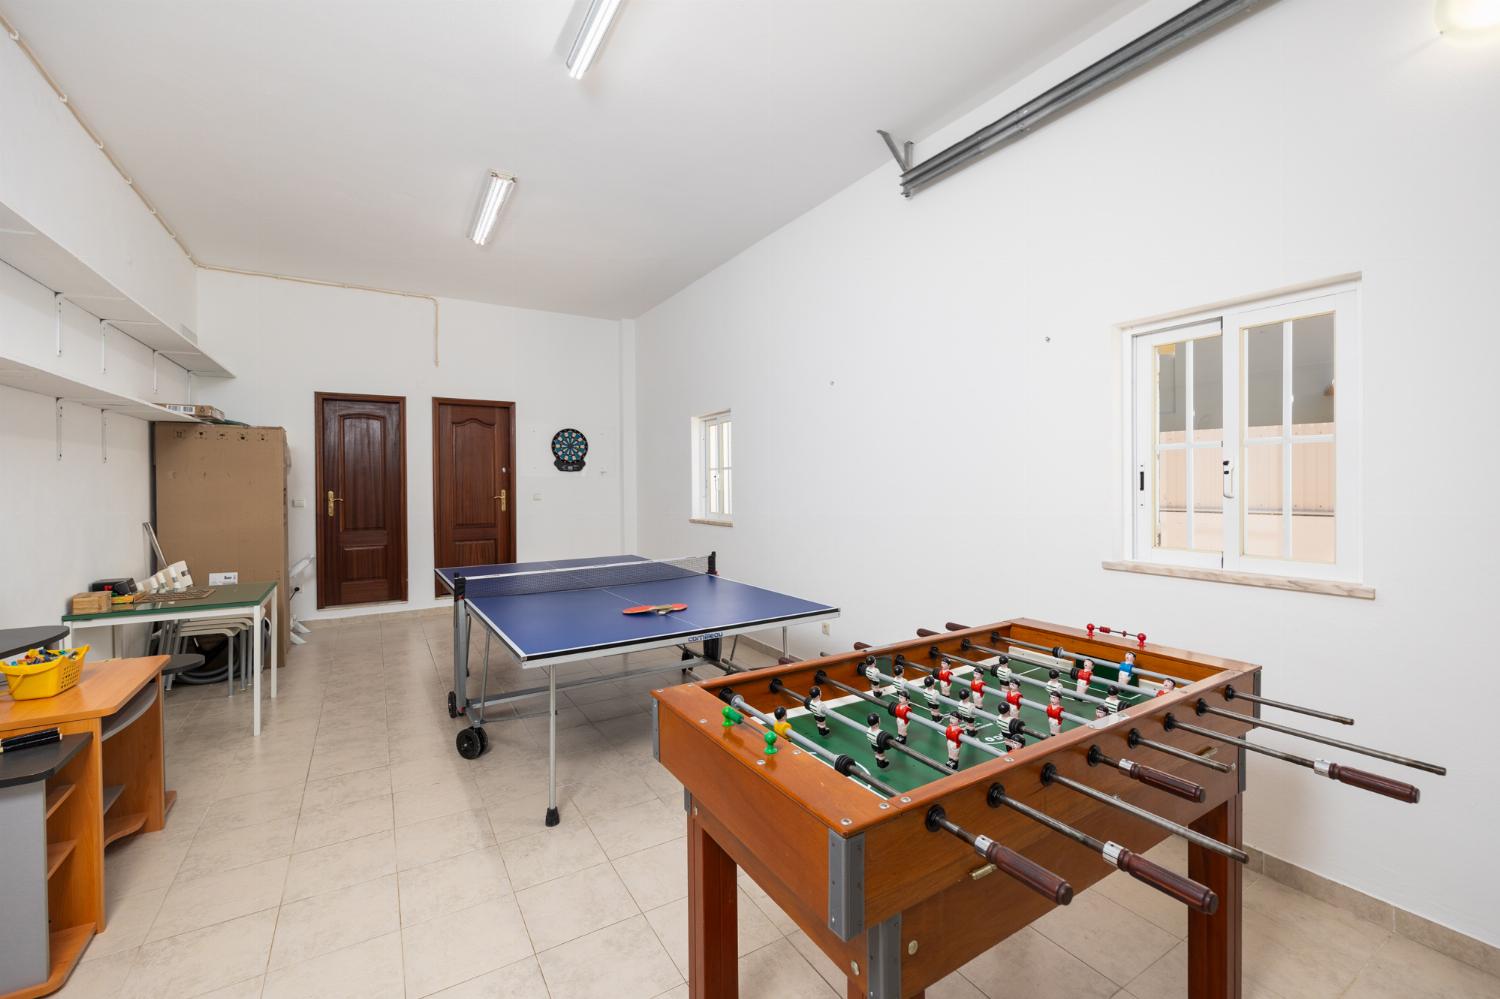 Games room with table tennis and foosball